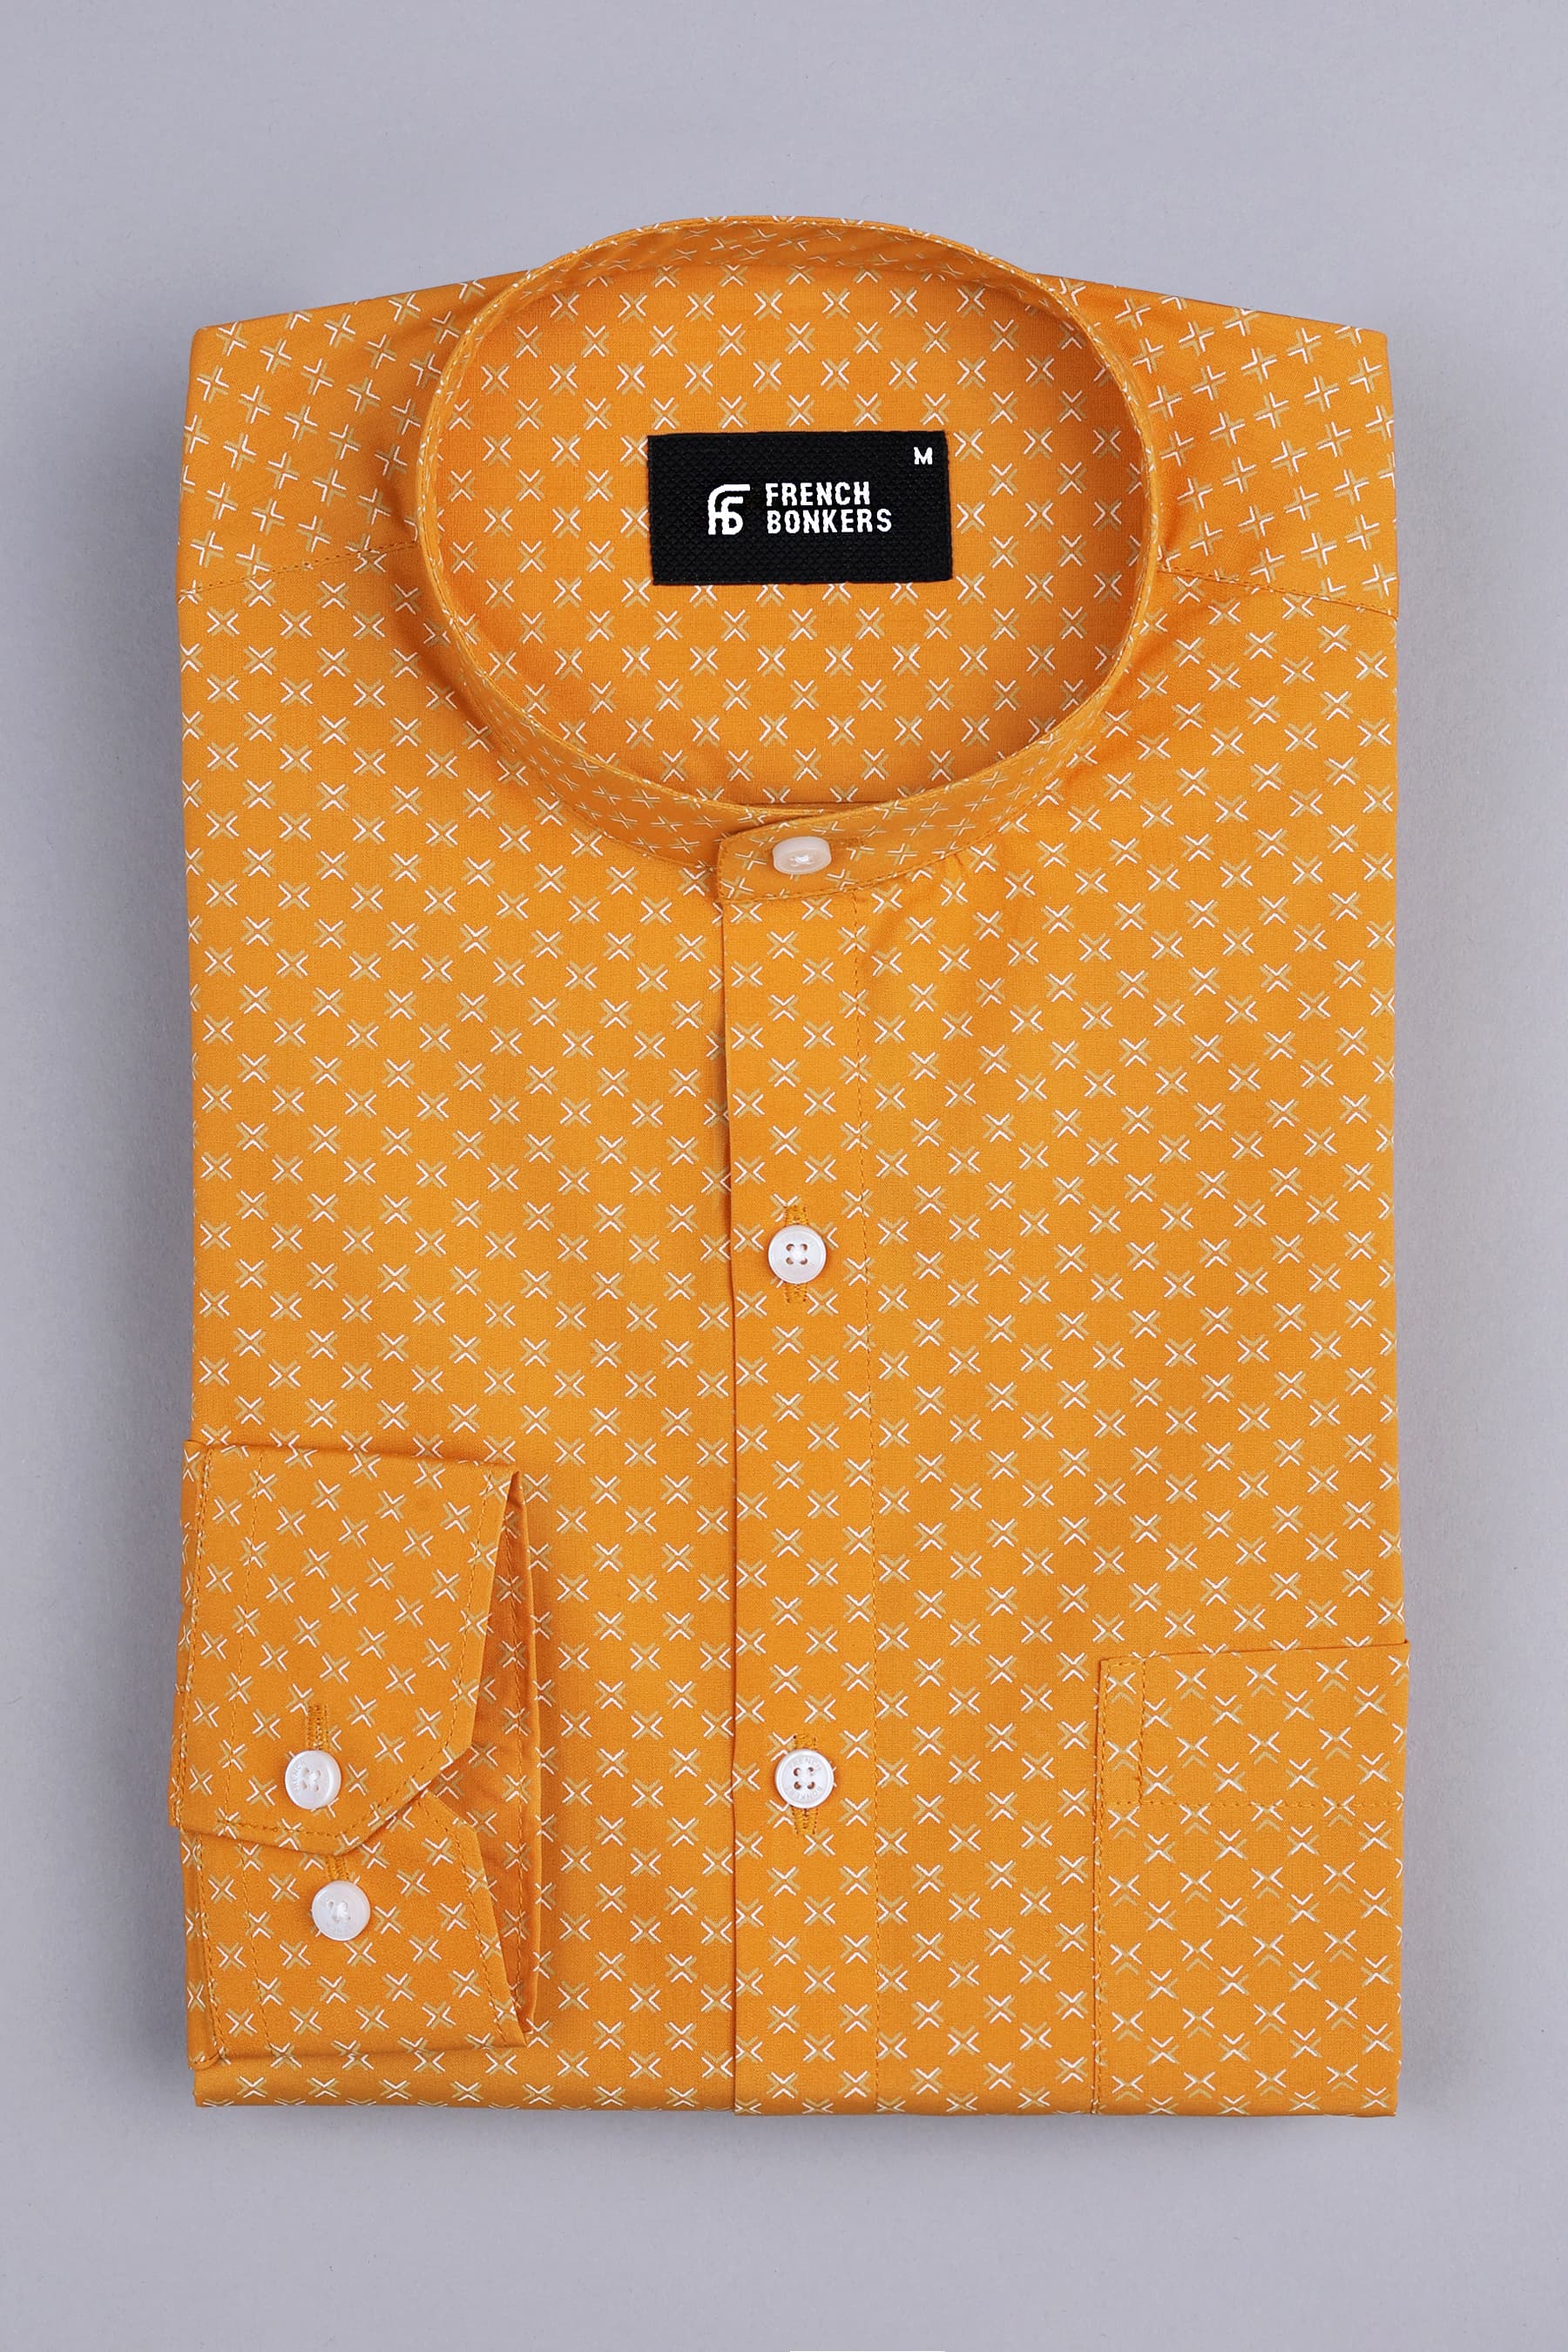 Butterscotch yellow with v mark printed cotton shirt